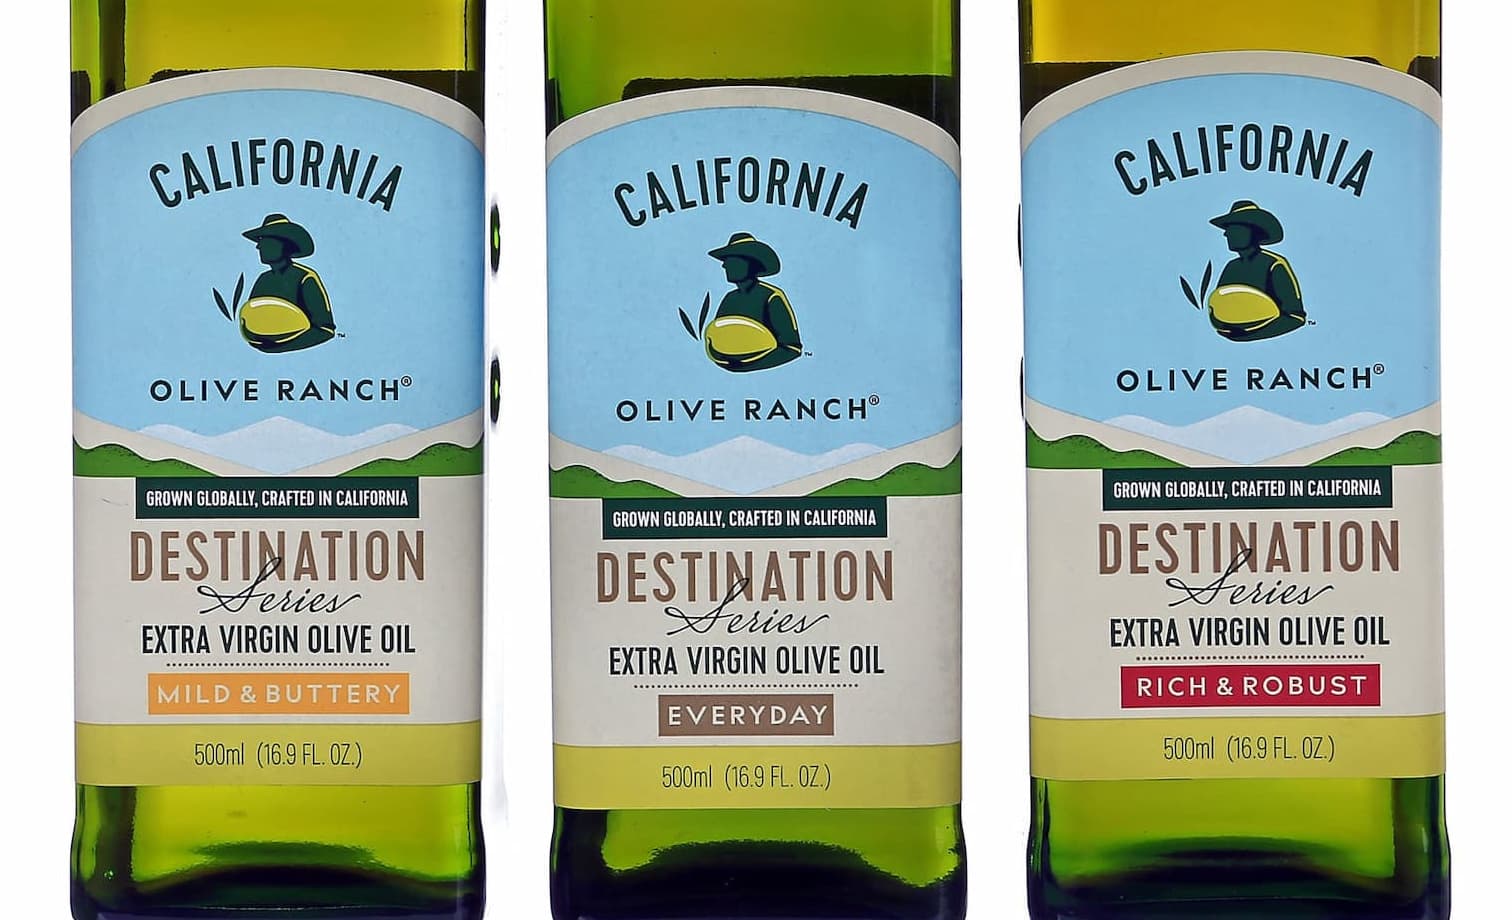 The very Italian problem at California Olive Ranch